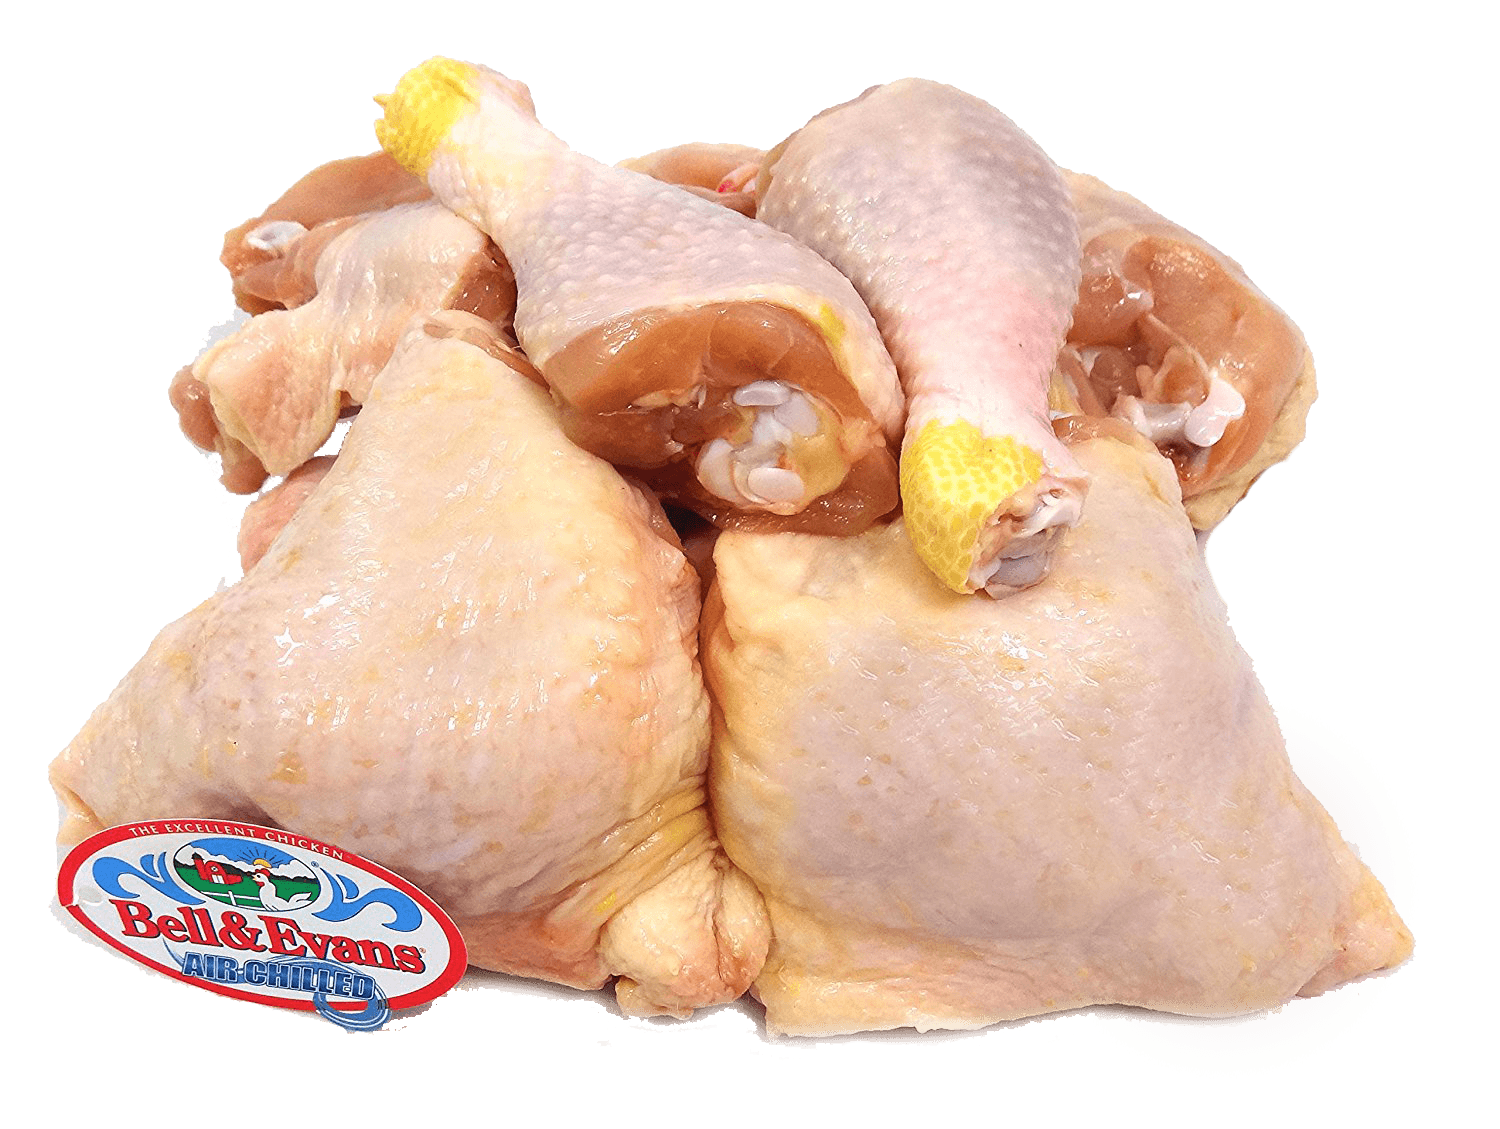 Fresh Local Meat Delivery - Bell And Evans Whole Chicken (2 Whole Chickens Cut In 8ths 7 Pounds). Never Frozen - Always Fresh - Air Chilled.